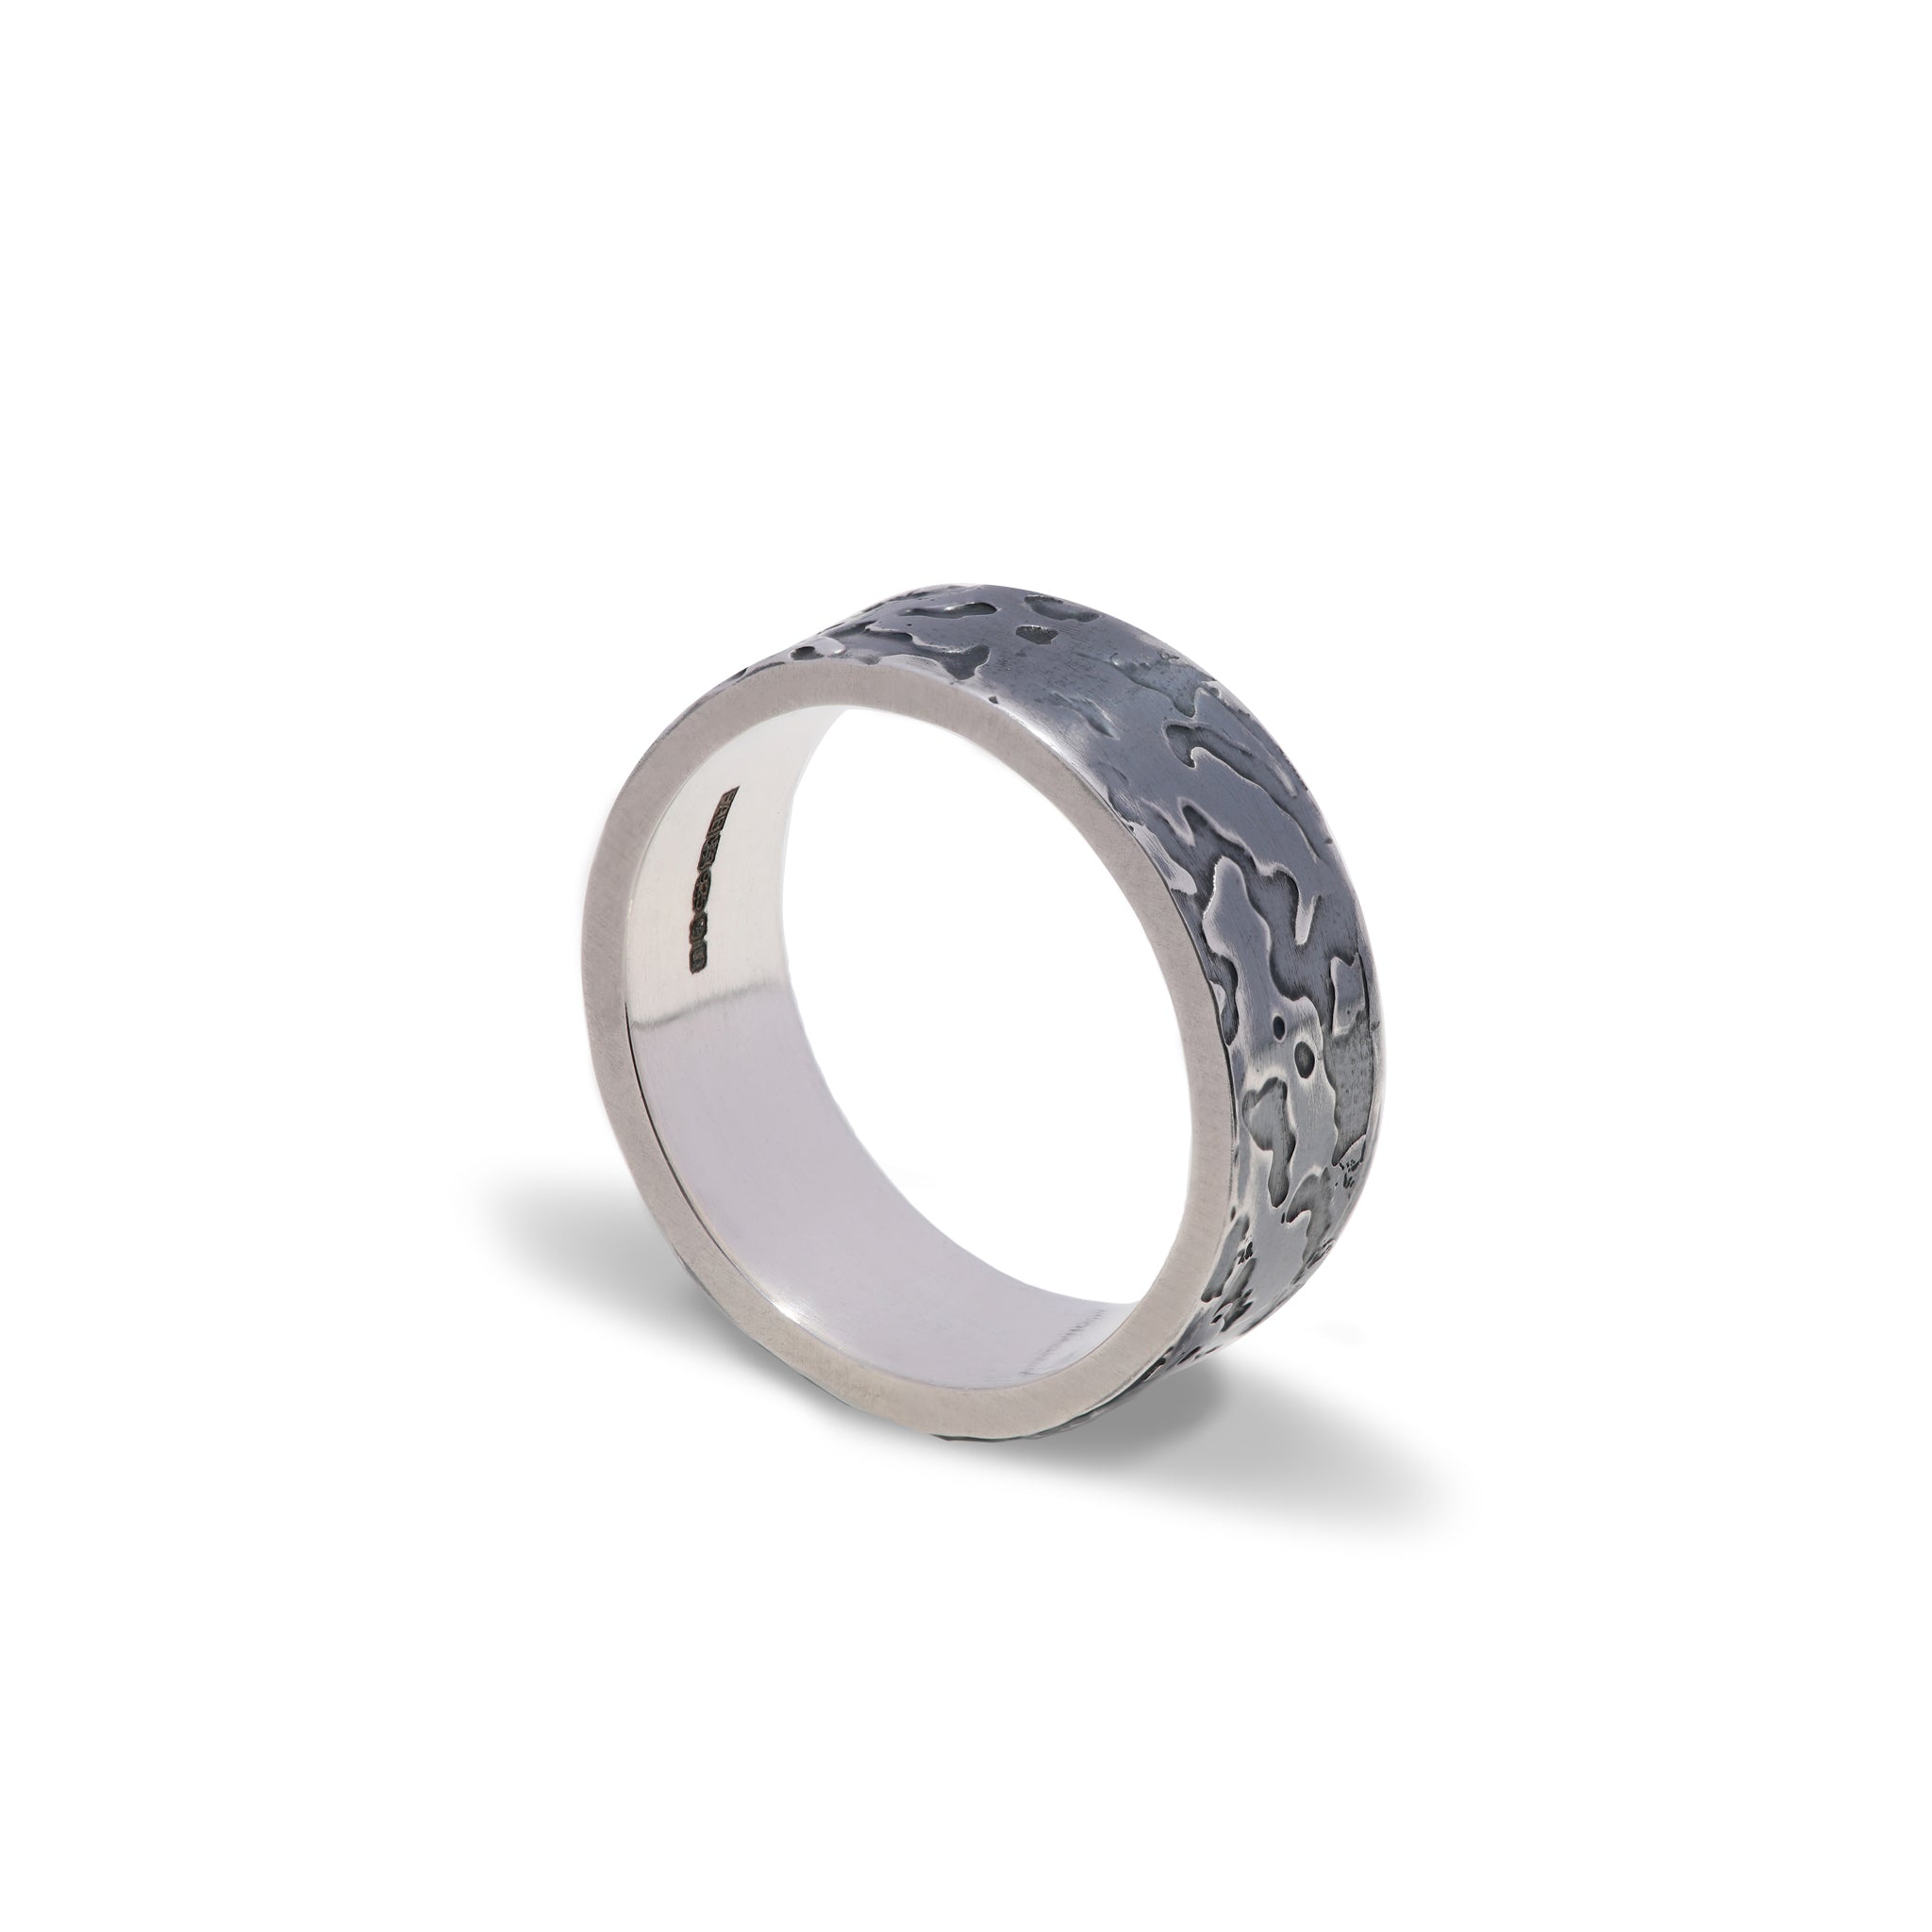 BFR Diana Porter men's plain 'and on' silver etch ring